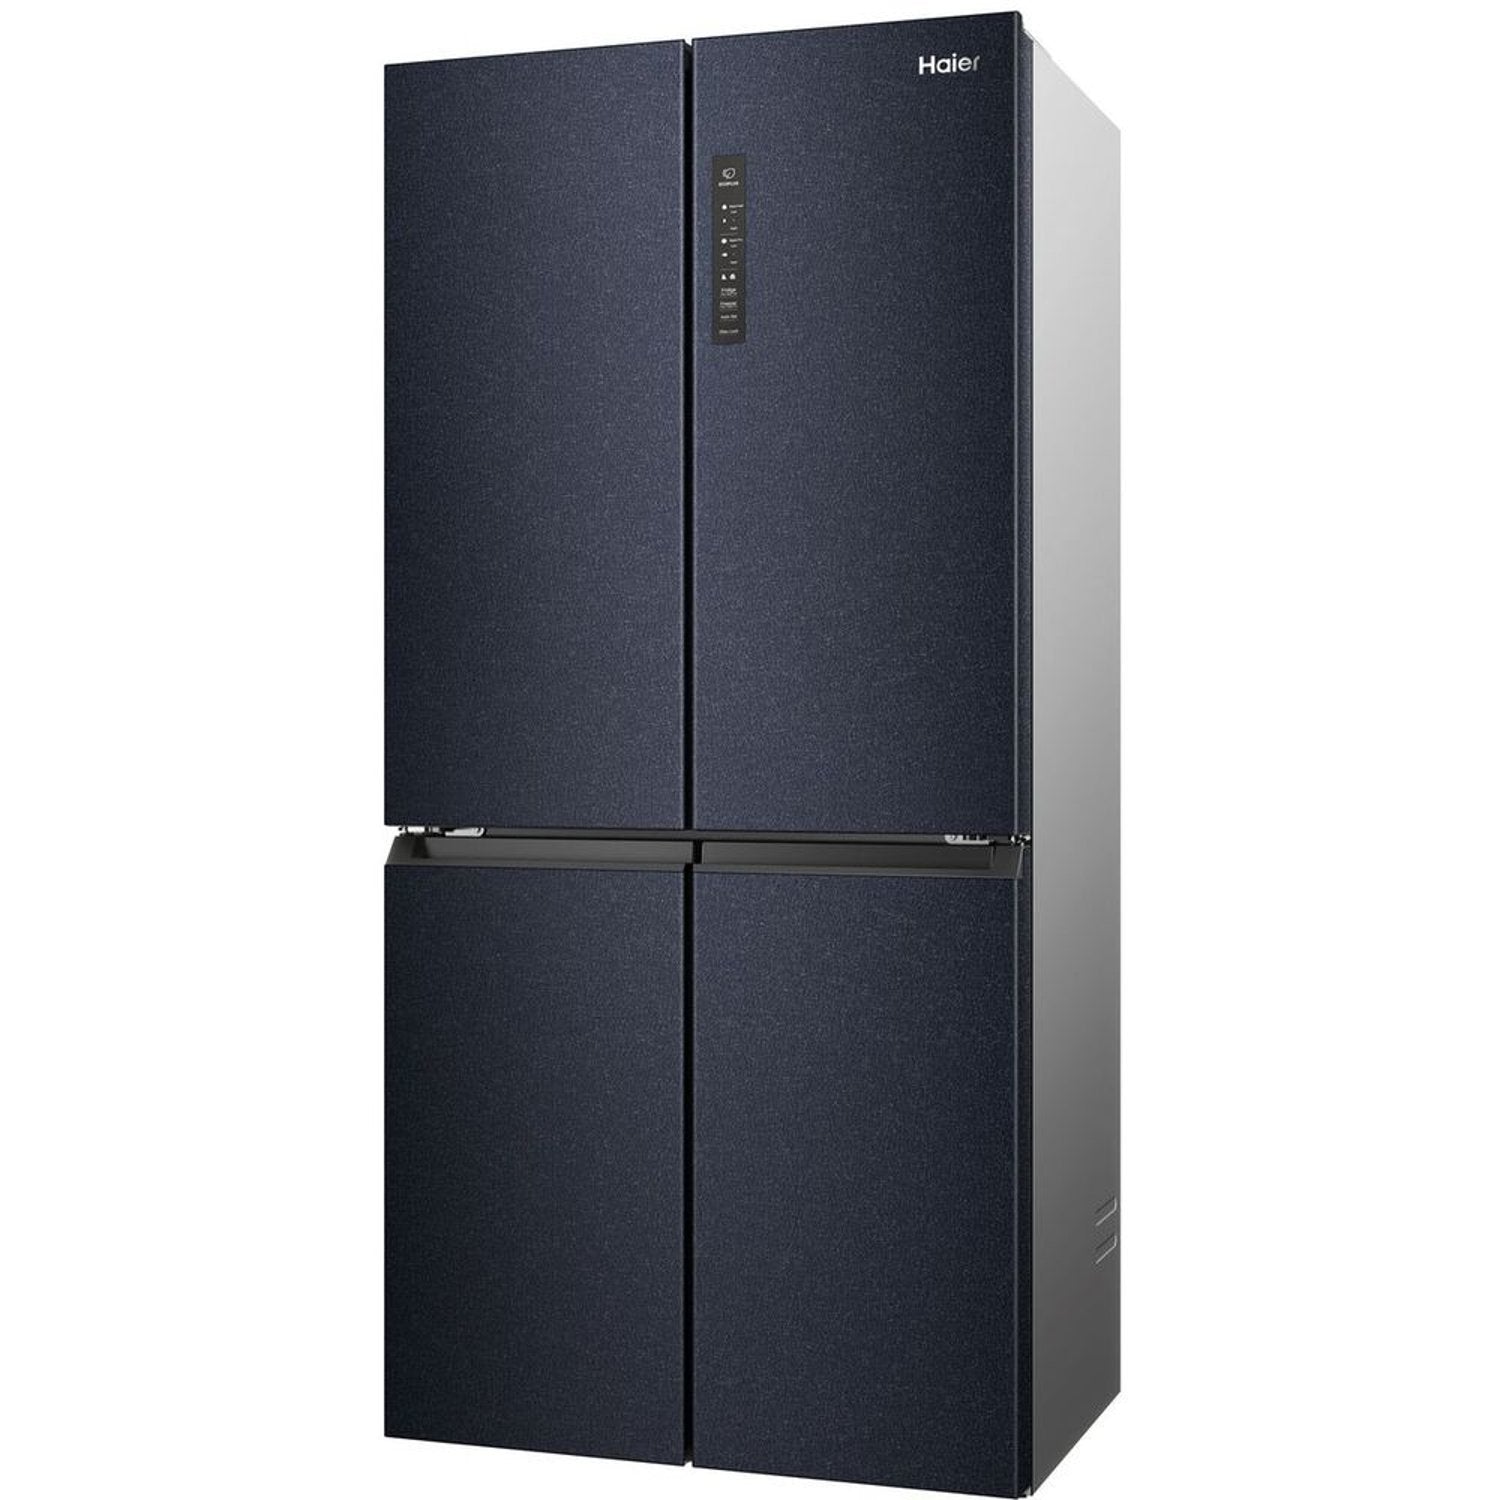 Haier French Door Refrigerator 433 Litres HRF-525MB